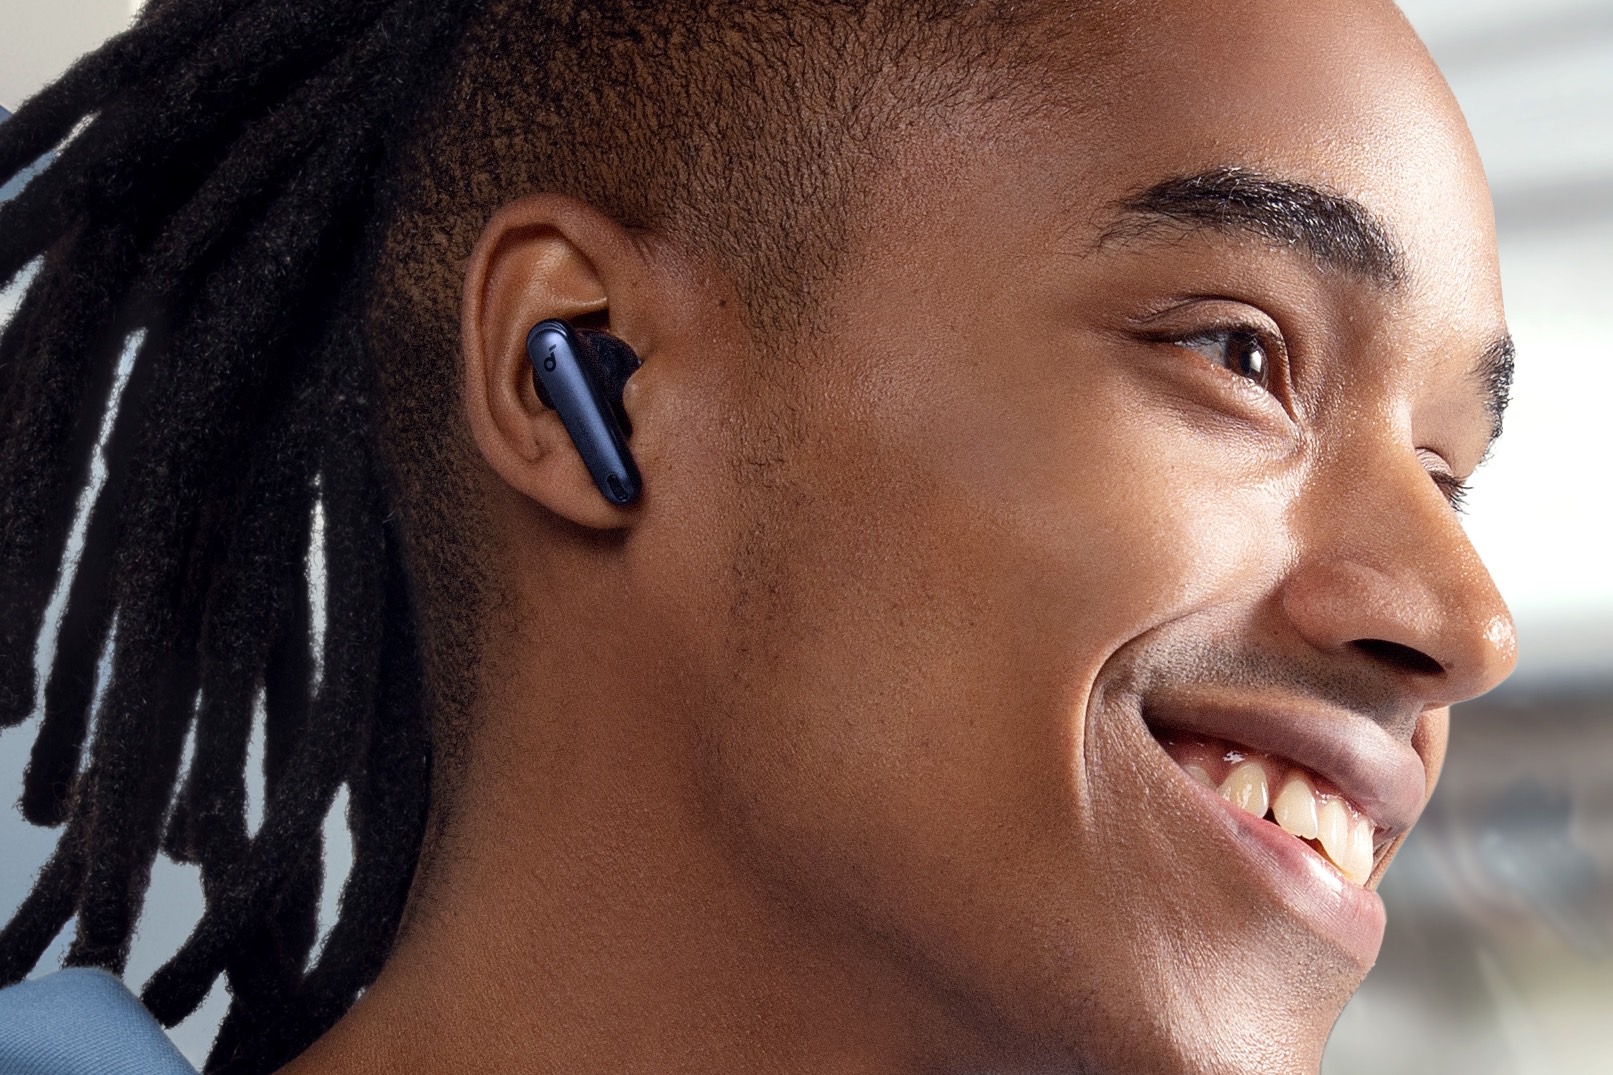 Soundcore's new wireless buds block up to 98% of external